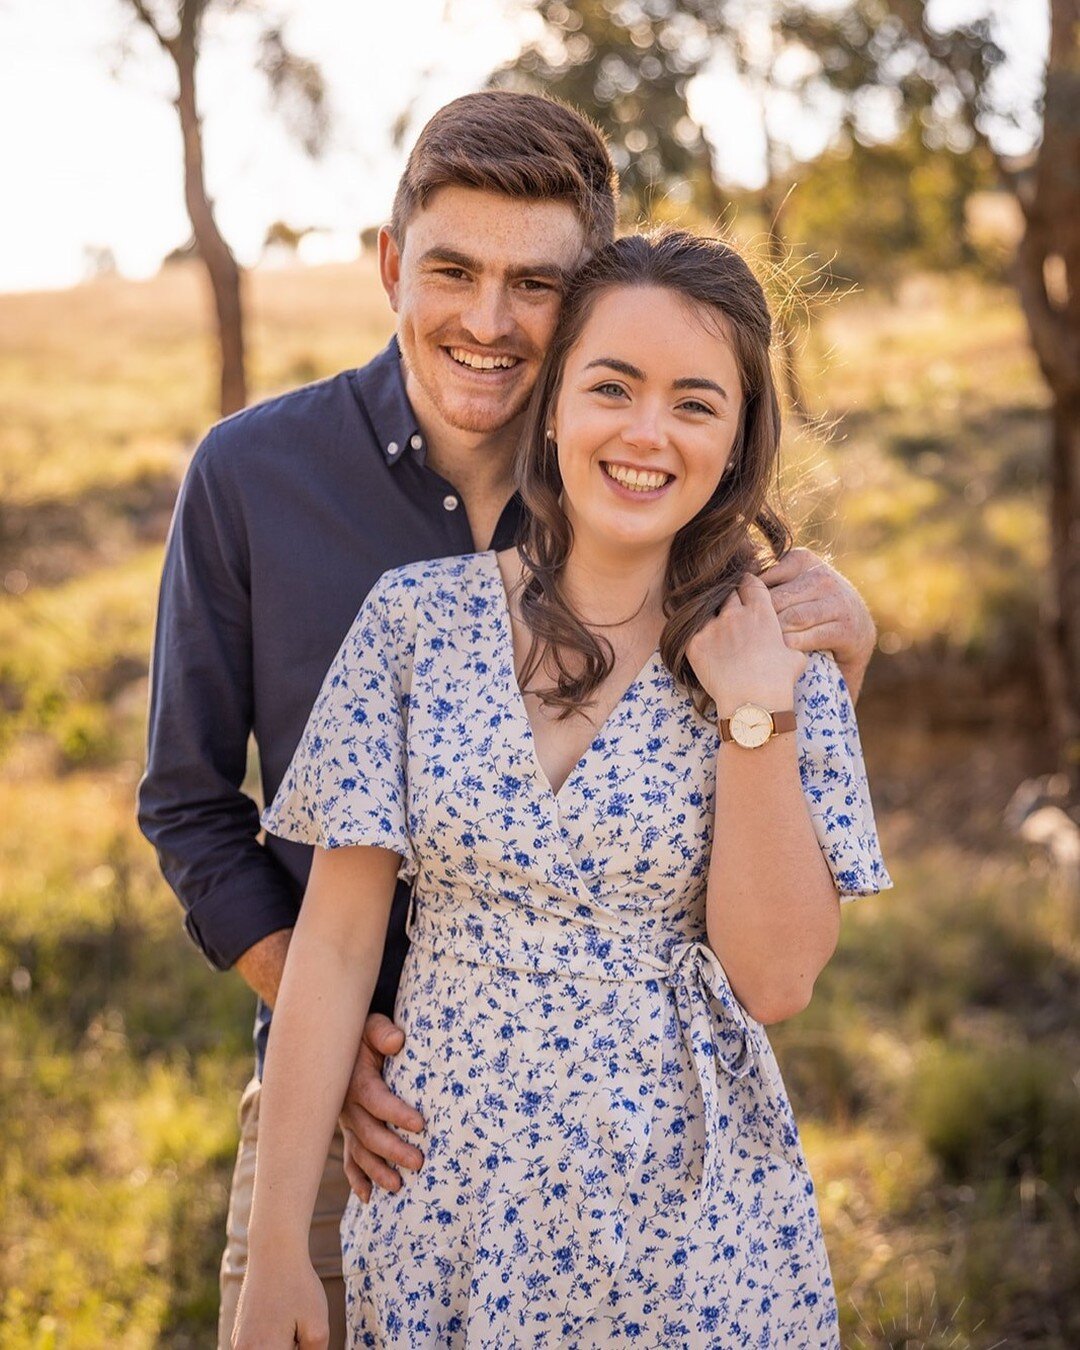 Today is the day! 

Spending today taking photos of these two lovebirds getting married.❤️